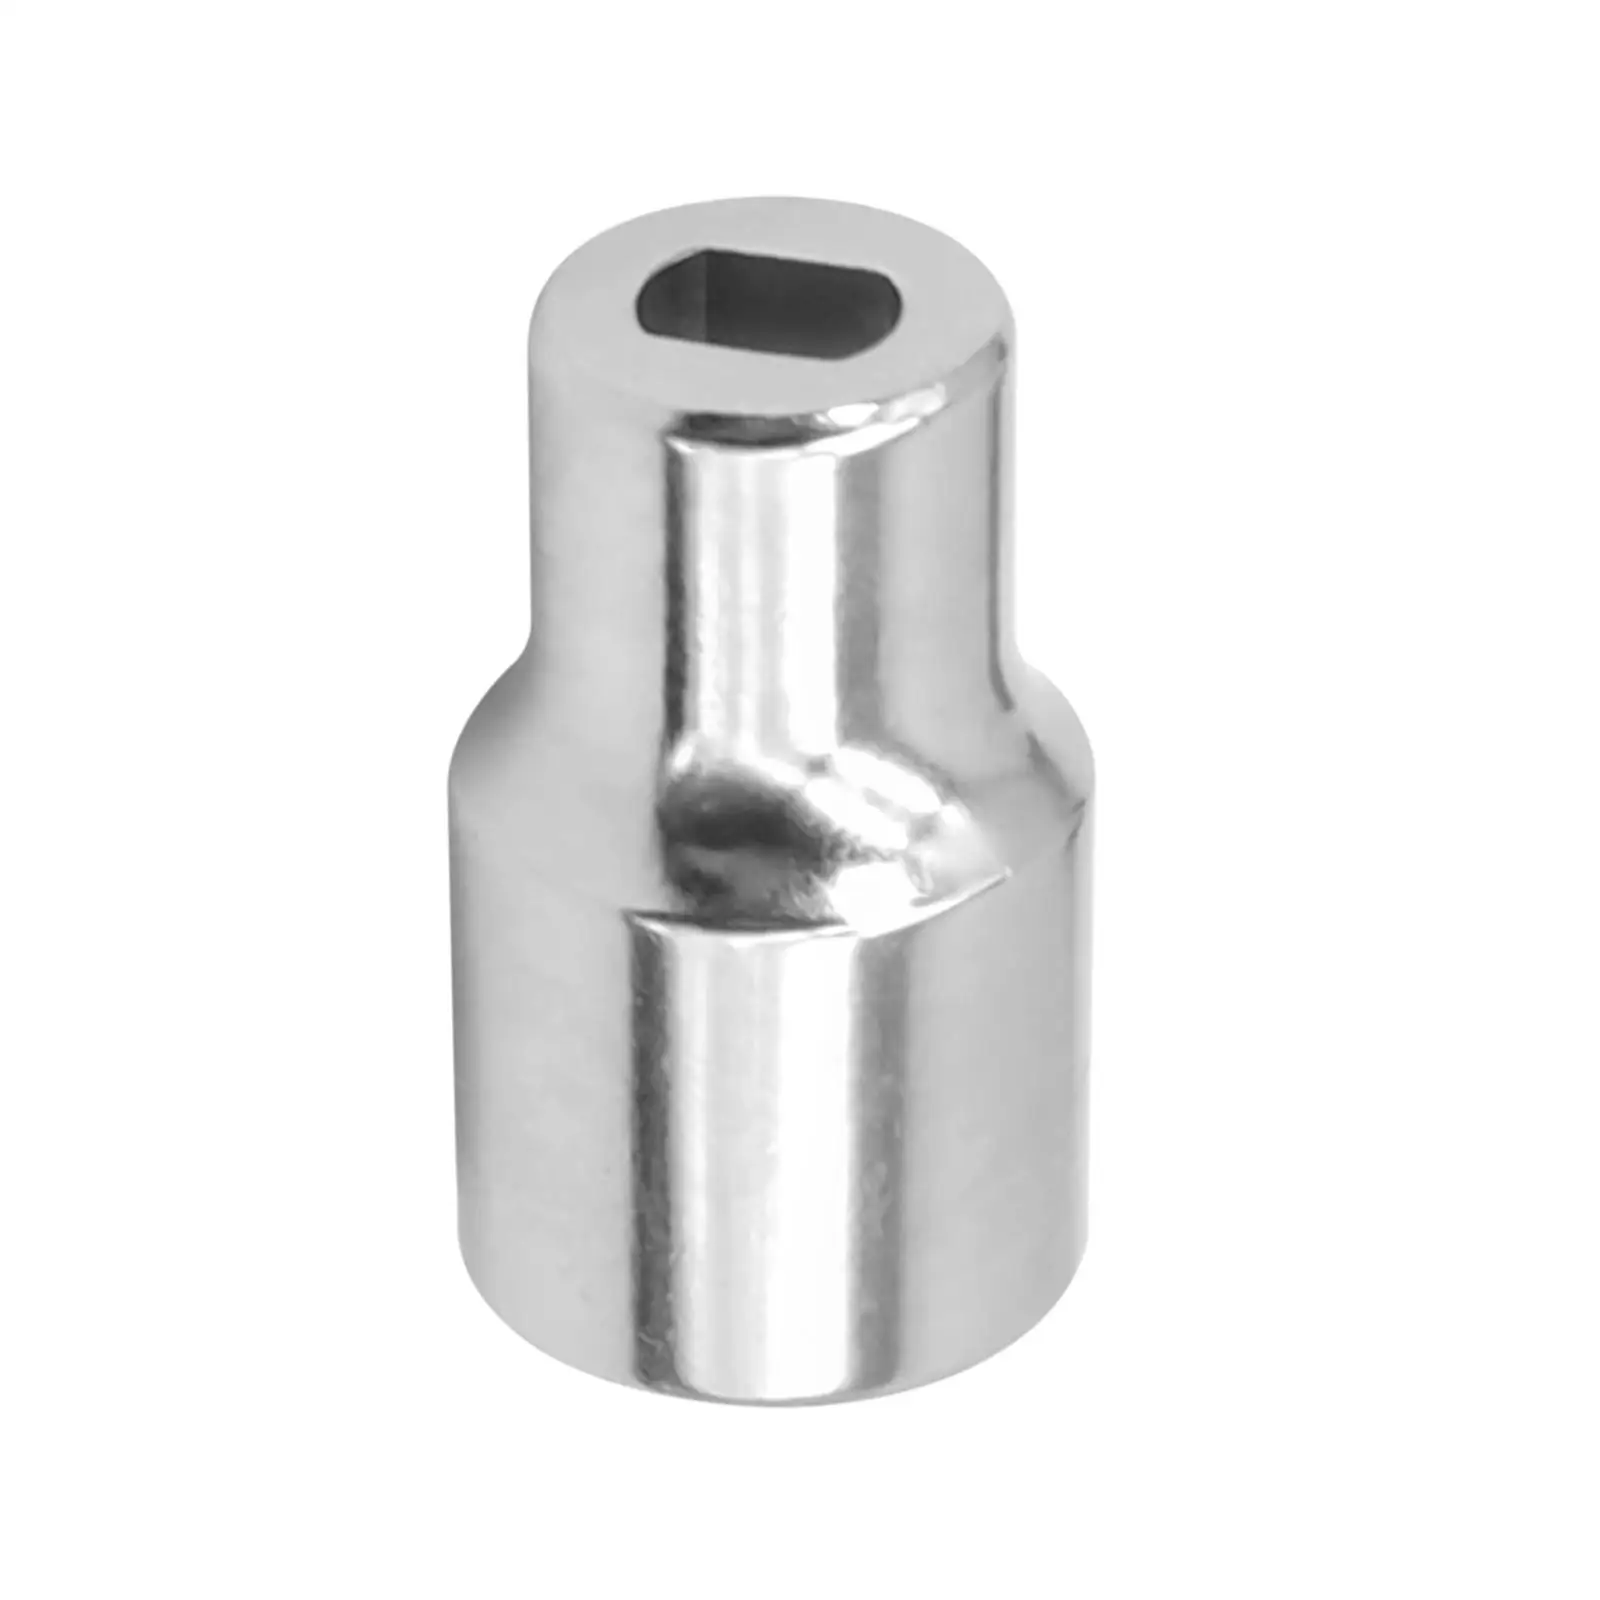 25284 Shock Absorber Socket  Replace Absorbers Fit the  Stem Tools for Cars, high reliability and high performance